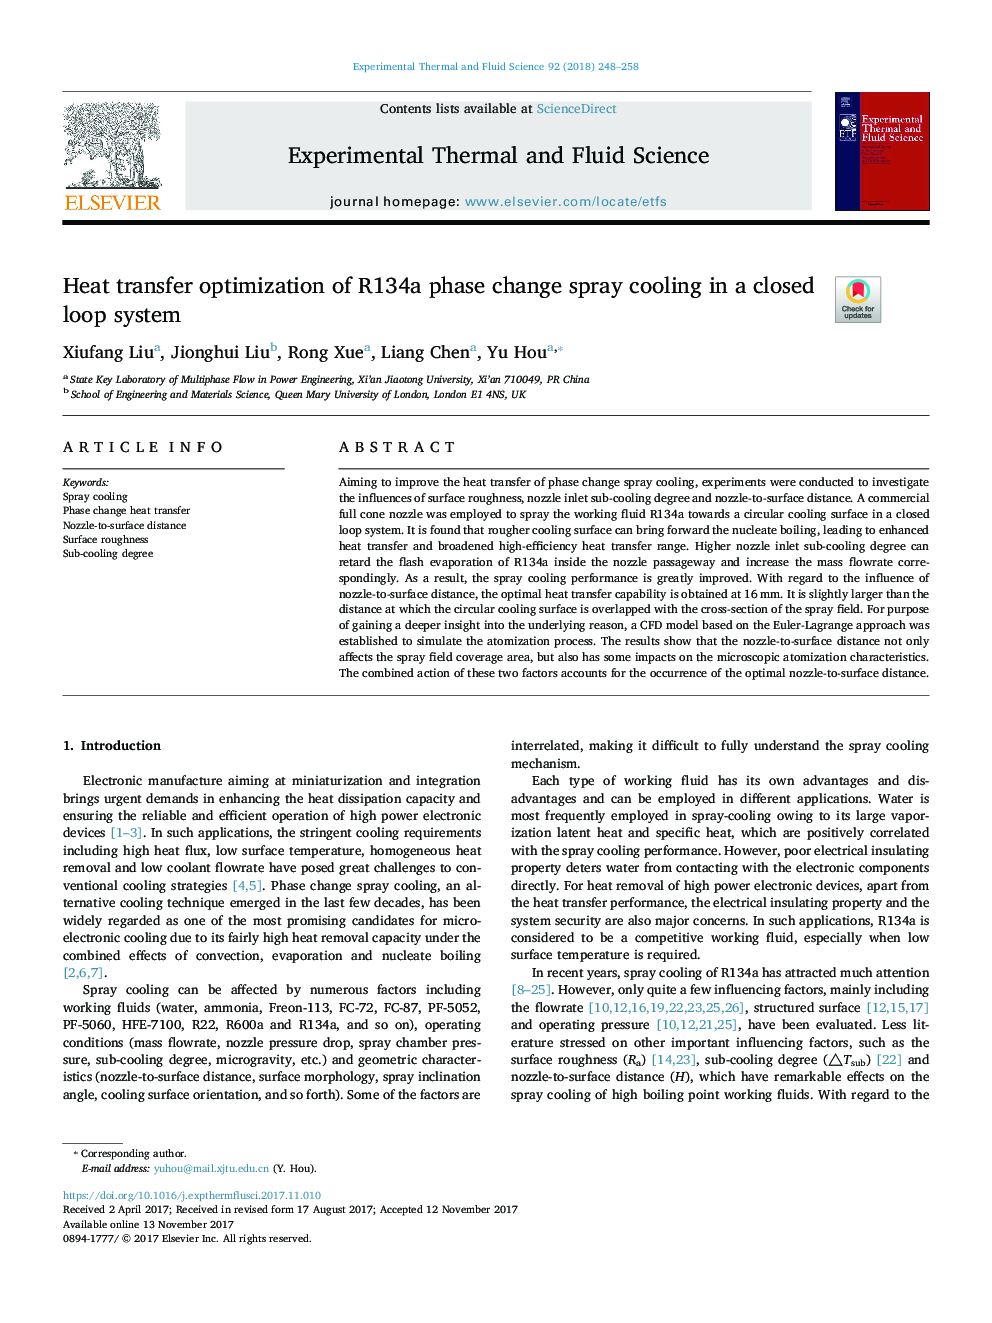 Heat transfer optimization of R134a phase change spray cooling in a closed loop system